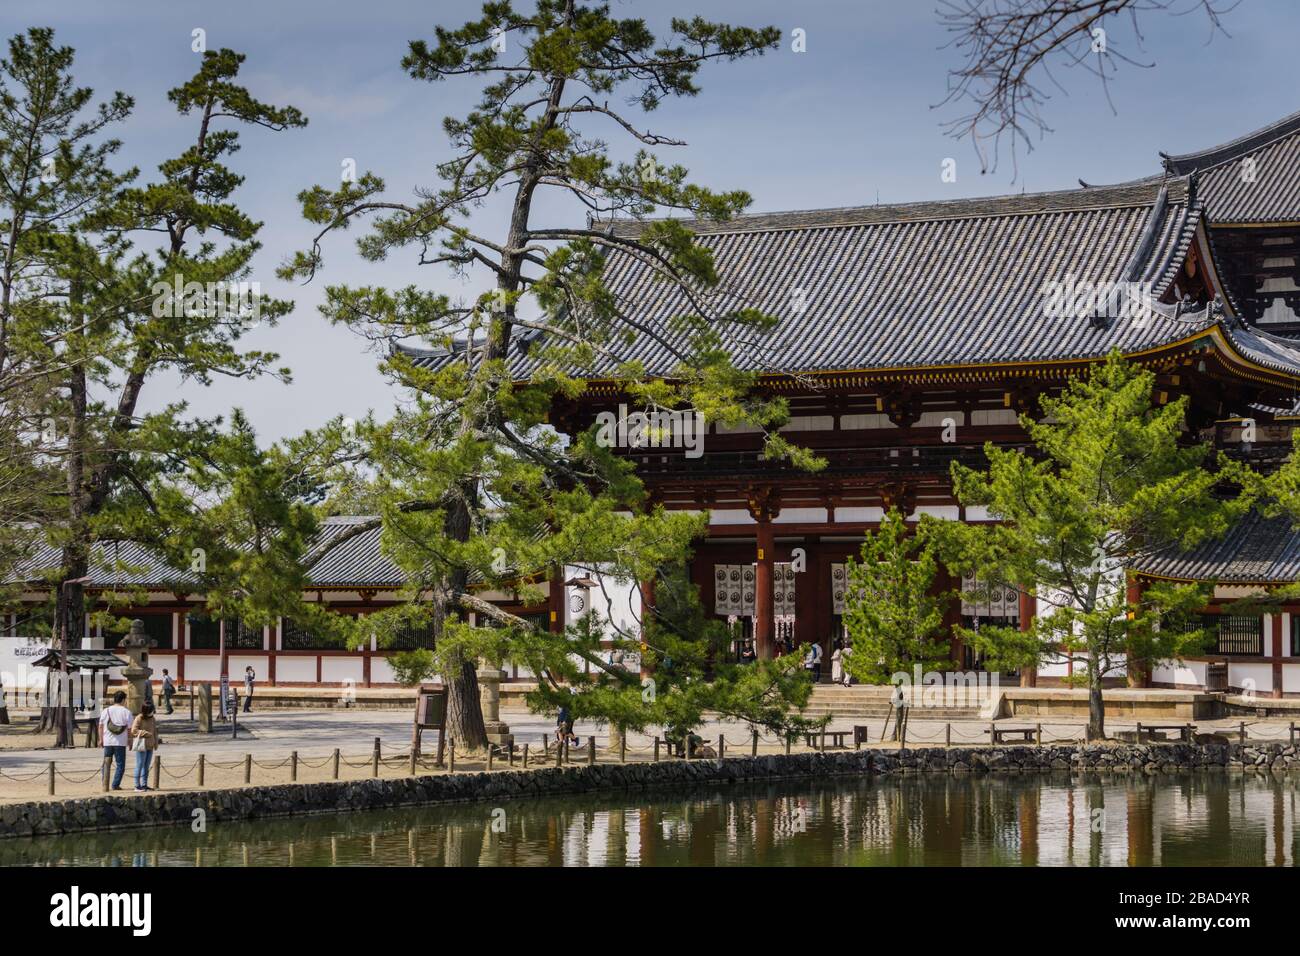 View of Todaiji Temple in Nara, Japan showing few tourists. Taken during downturn in tourism due to the COVID-19 pandemic. Stock Photo